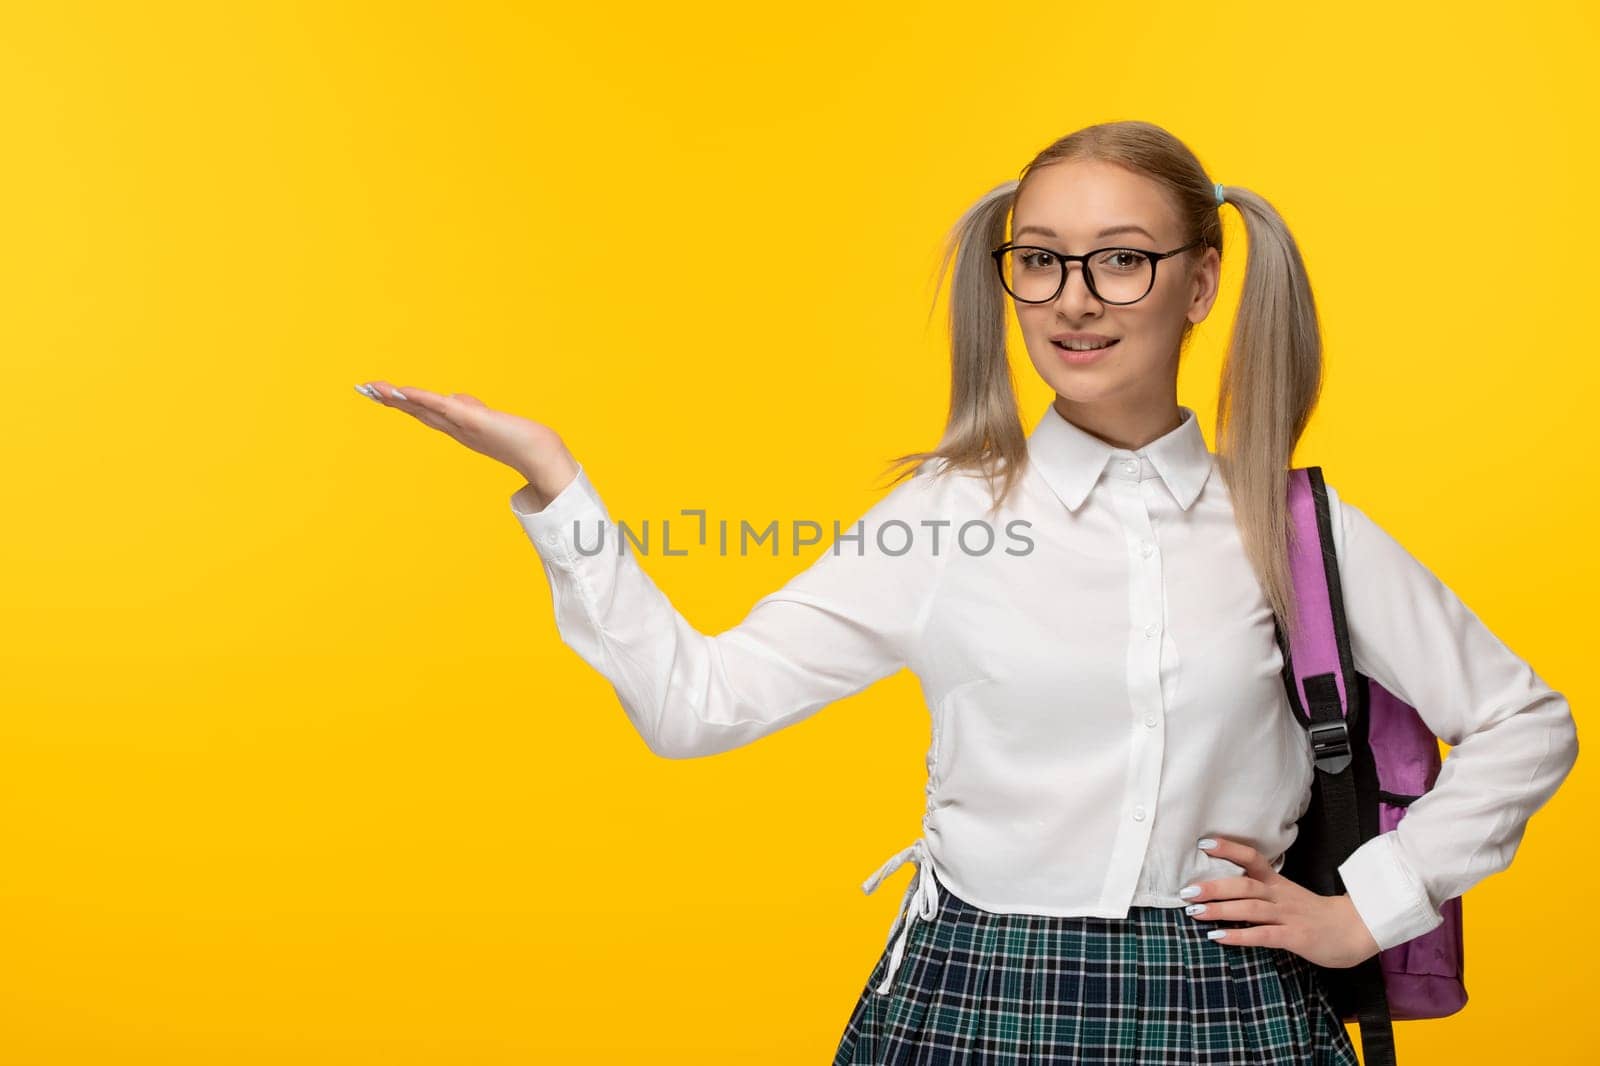 world book day smiling cute school girl with waving hands and pony tails